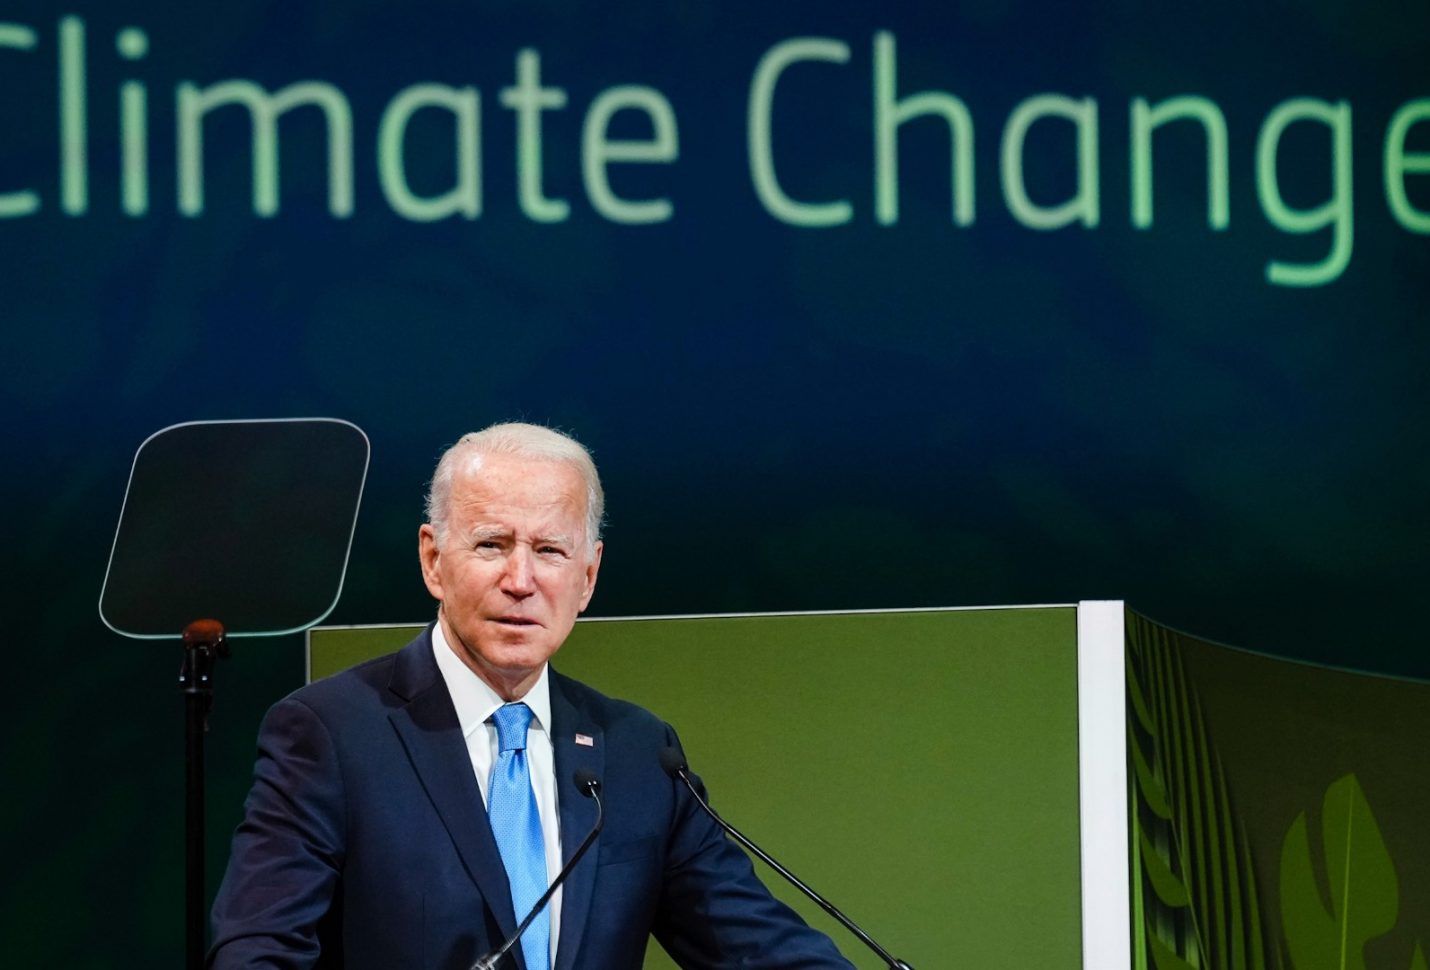 Biden announces executive actions to turn climate crisis into opportunity